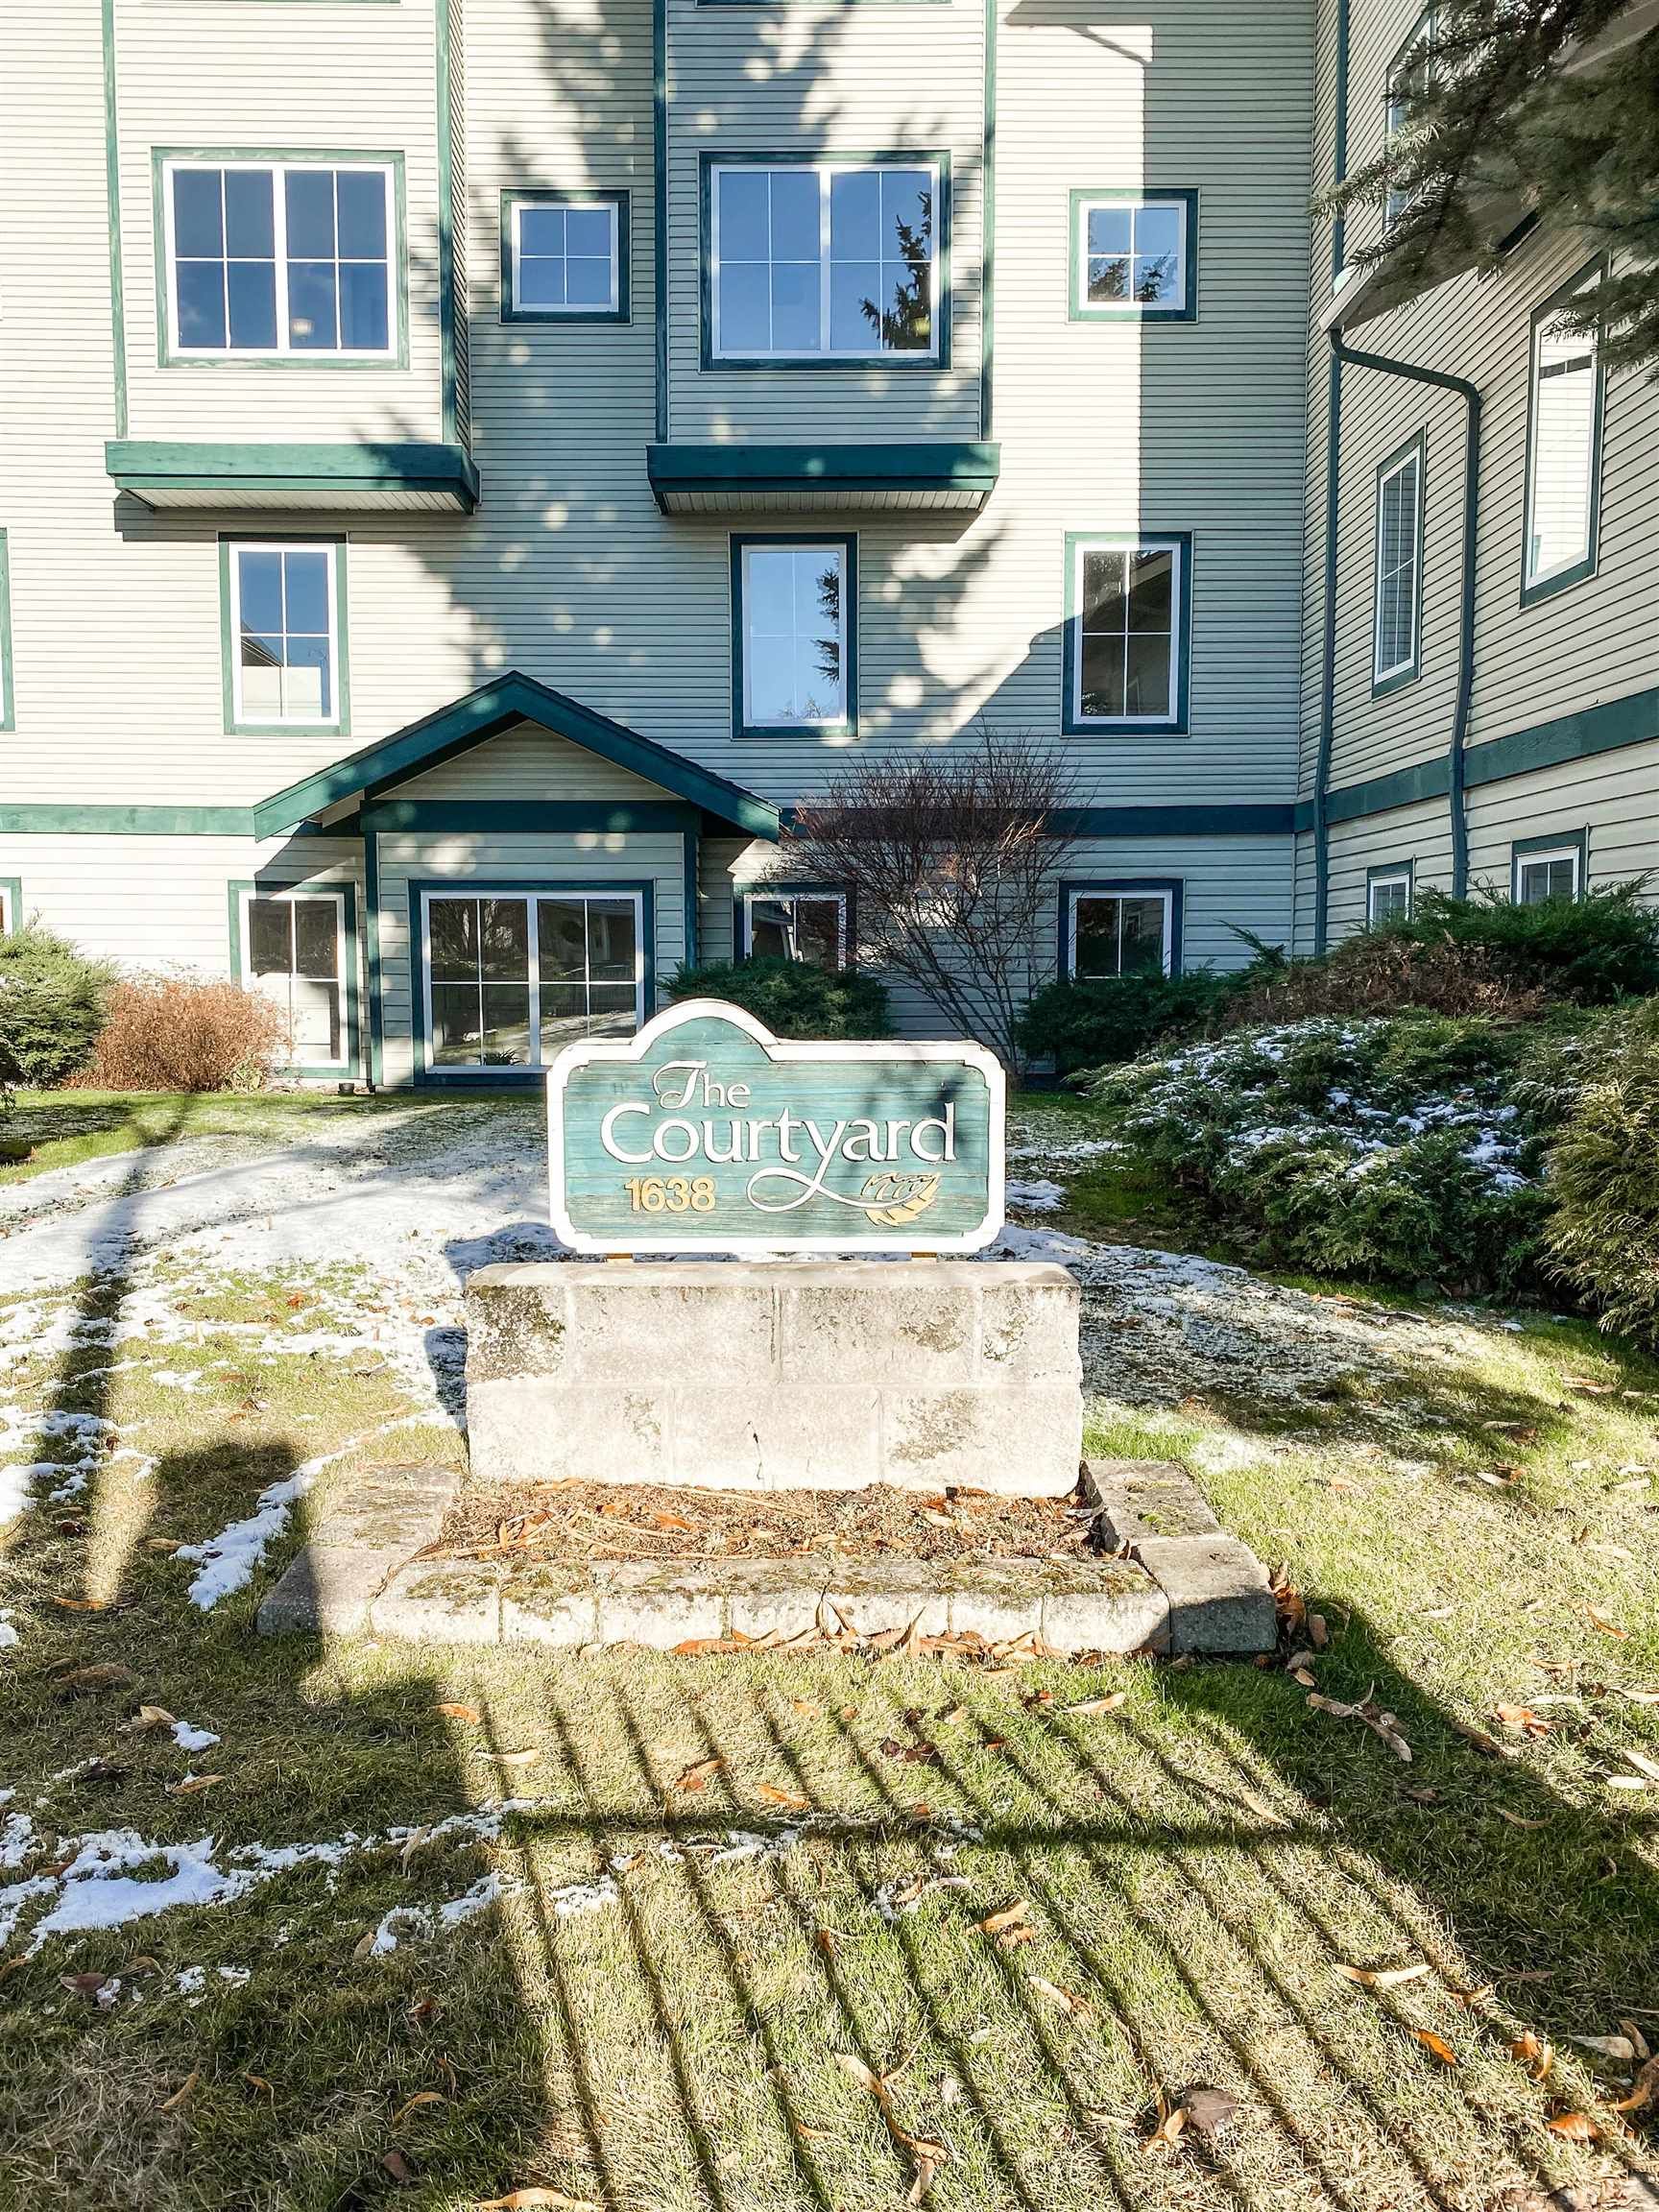 Main Photo: 403 1638 6TH Avenue in Prince George: Downtown PG Condo for sale (PG City Central (Zone 72))  : MLS®# R2633666